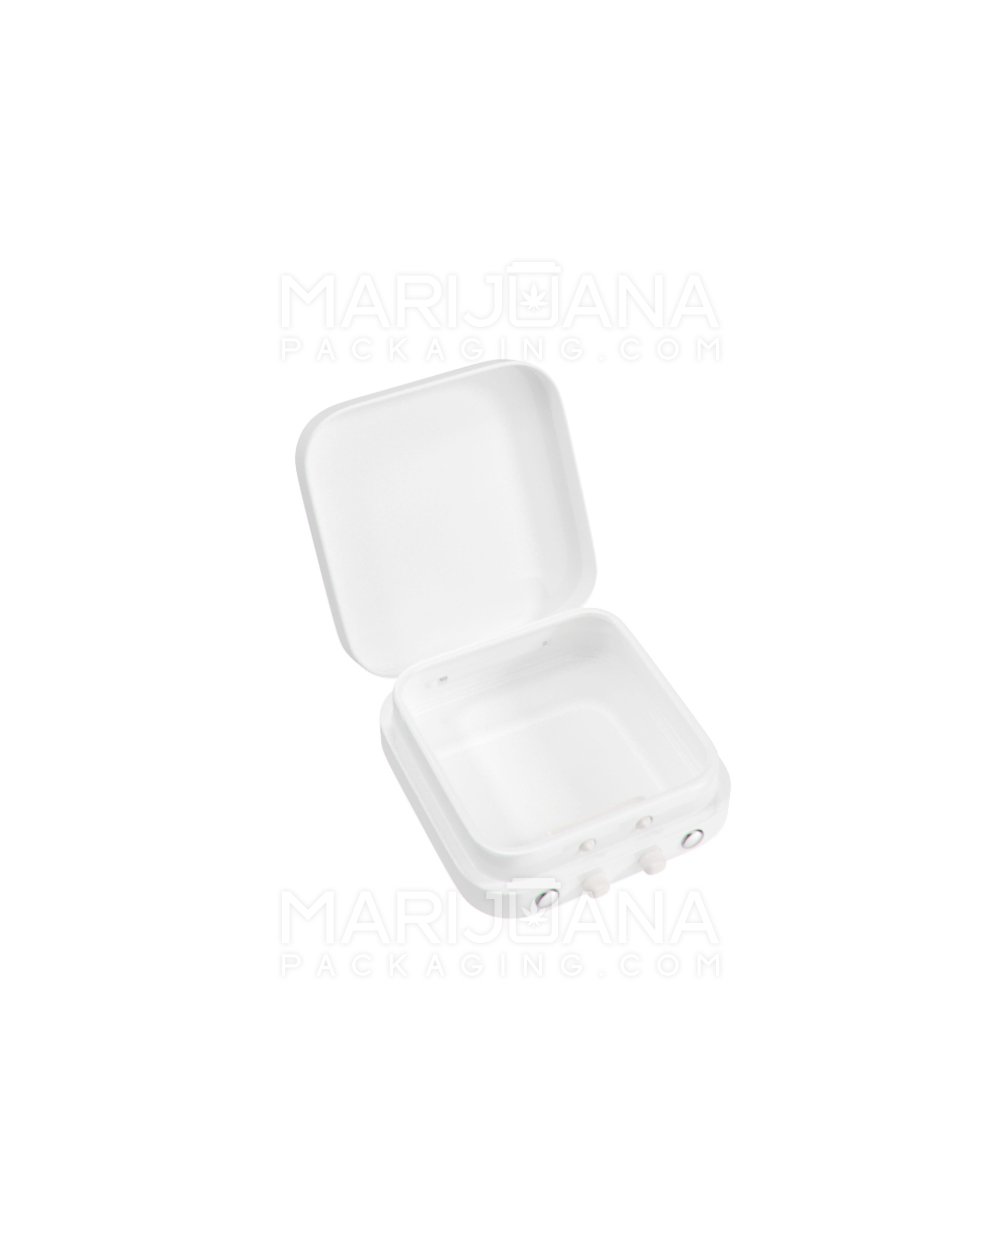 Custom 100% Recyclable Child Resistant Hinged-Lid Micro Pack Edible Container | 53.4mm x 50.1mm - White Tin - 2